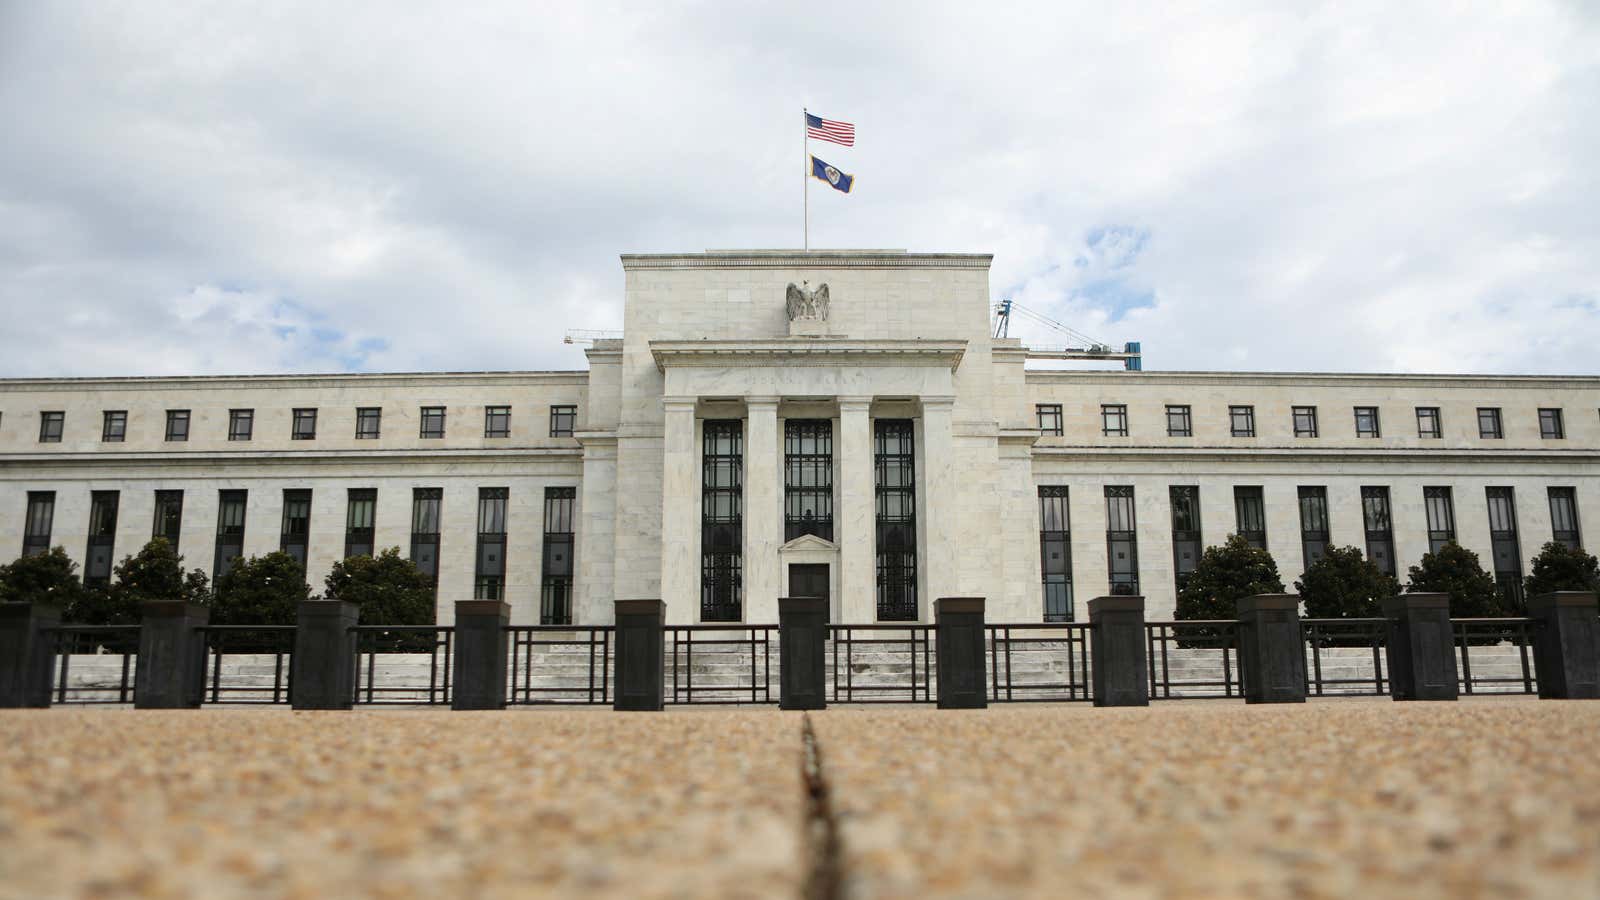 The Fed is raising rates, big banks aren’t.